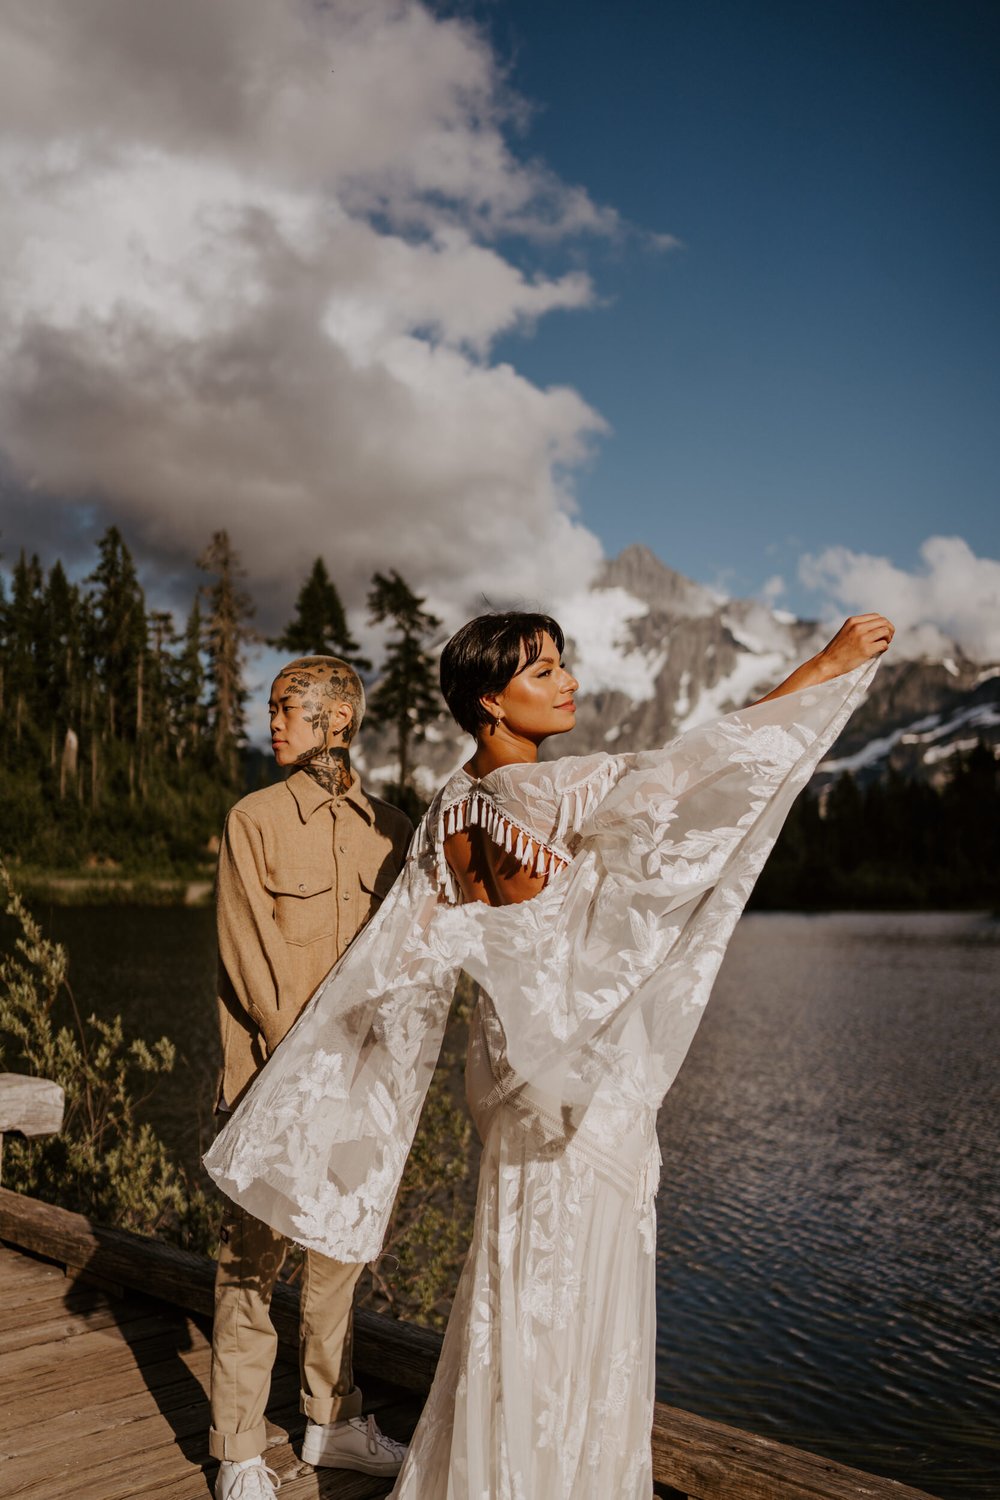 North Cascades National Park Elopement at Picture Lake, Pacific Northwest Elopement, Washington Elopement, Photography by Tida Svy | www.tidasvy.com